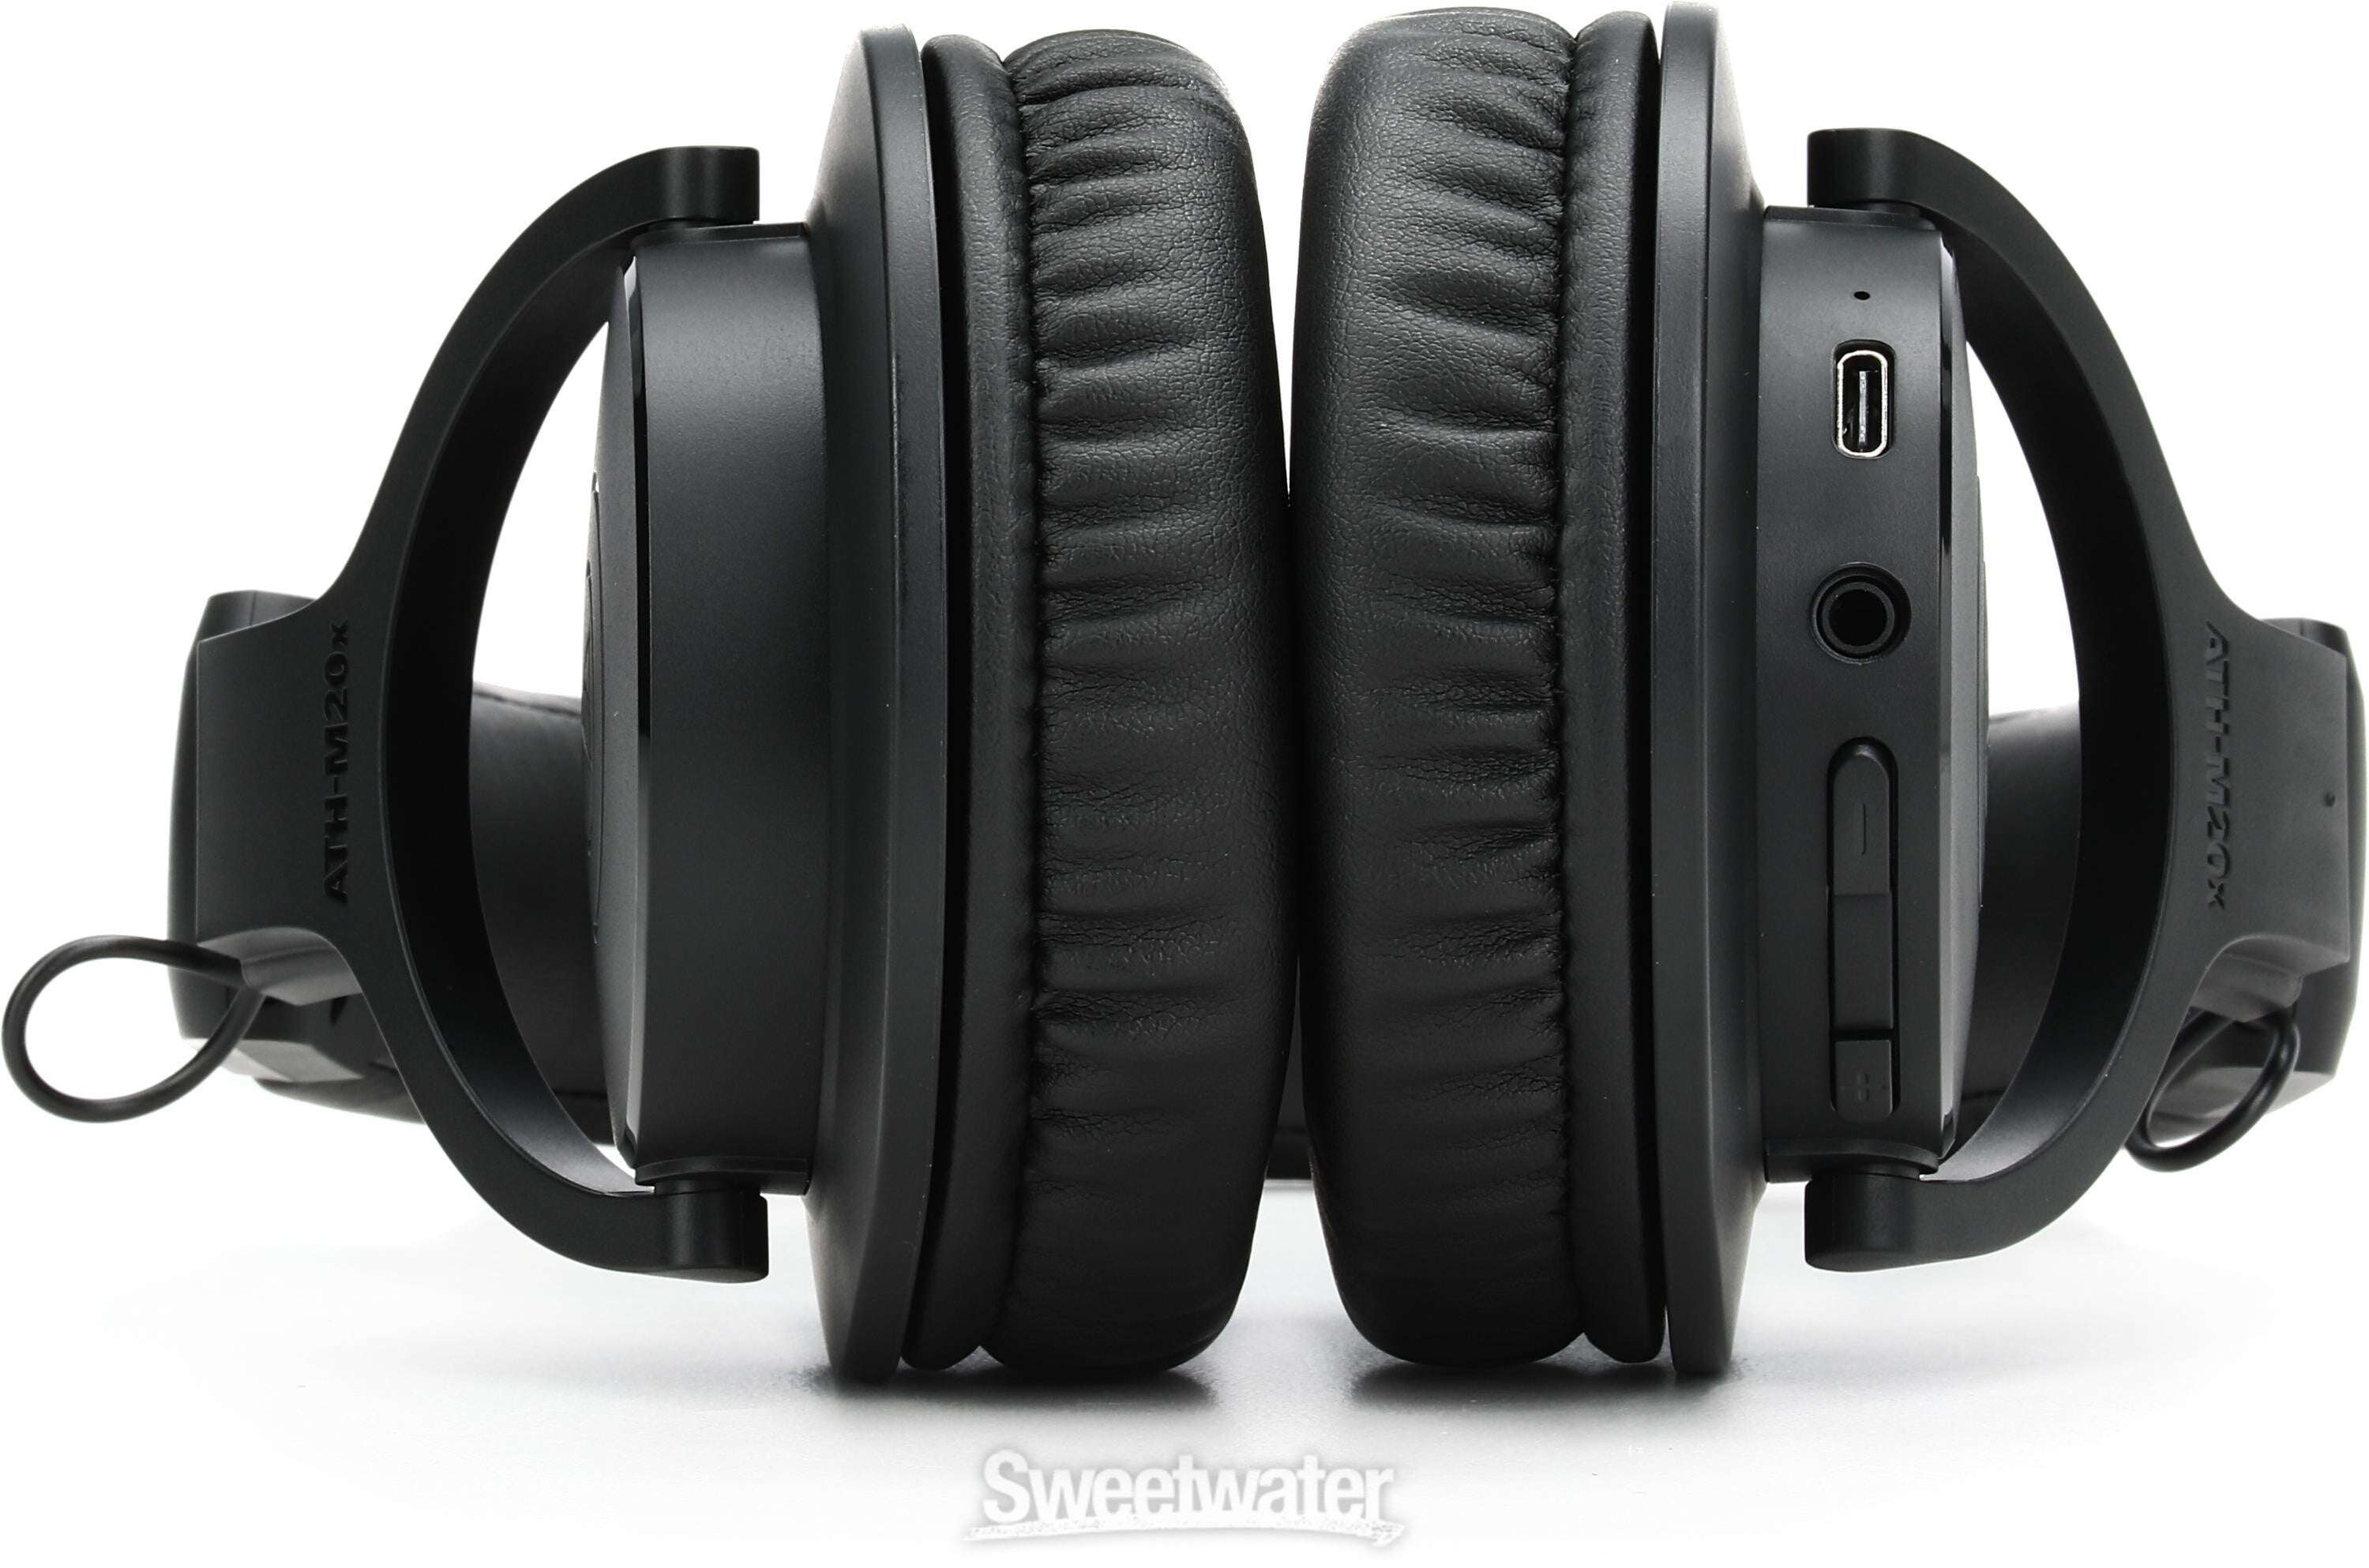 Audio-Technica ATH-M20xBT Wireless Over-ear Headphones | Sweetwater